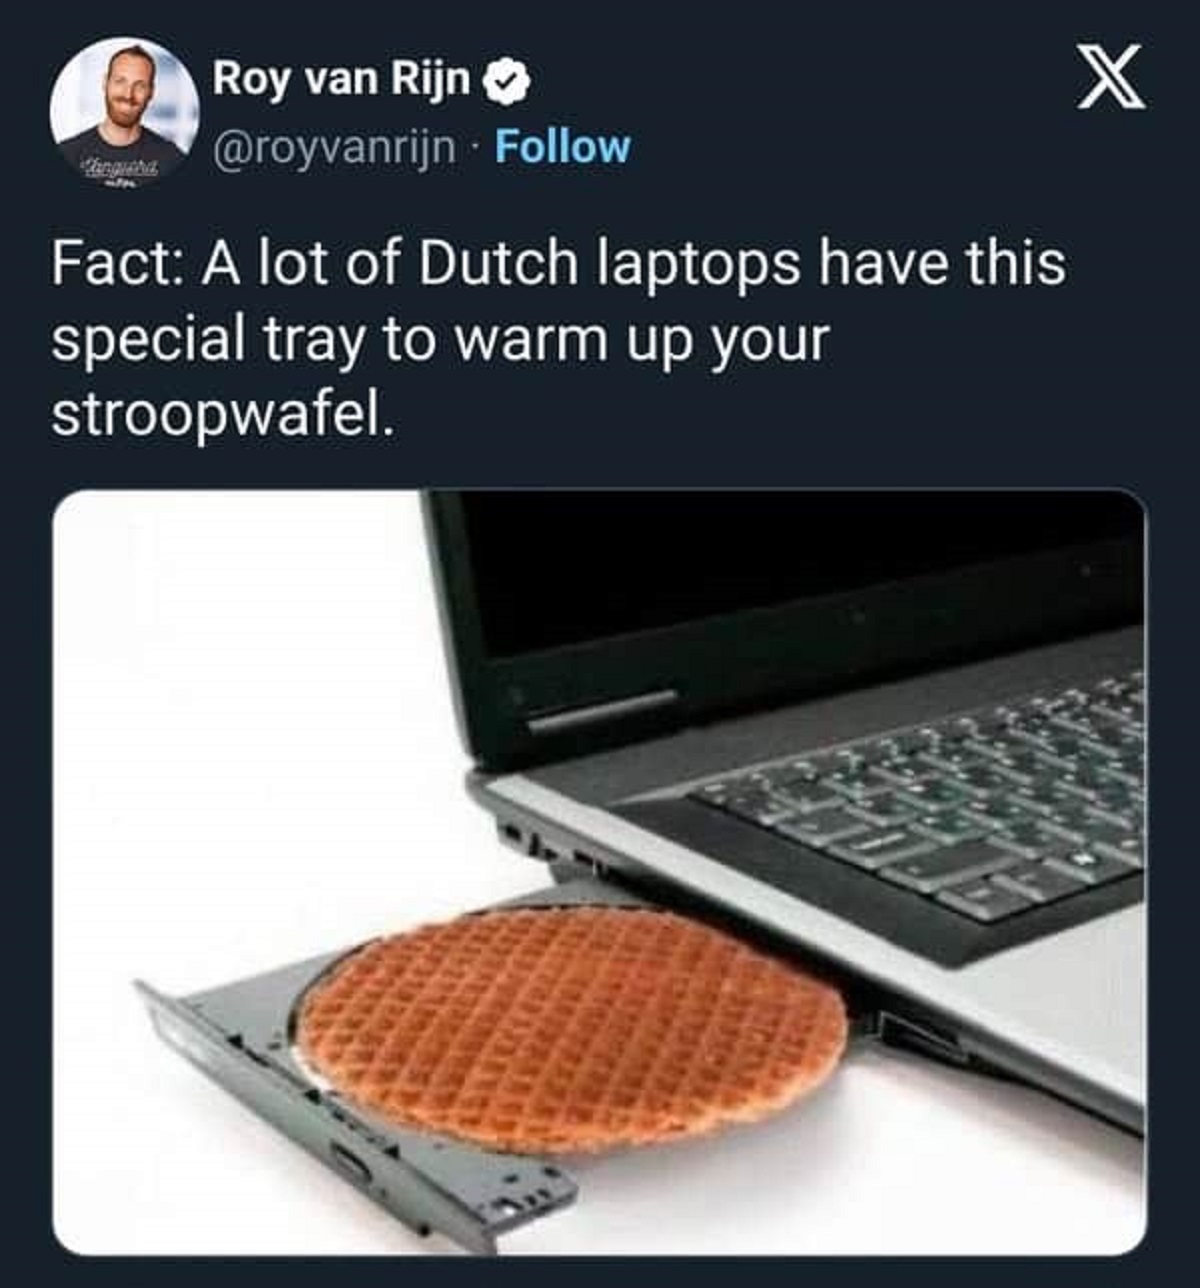 Photograph - Roy van Rijn Fact A lot of Dutch laptops have this special tray to warm up your stroopwafel. X